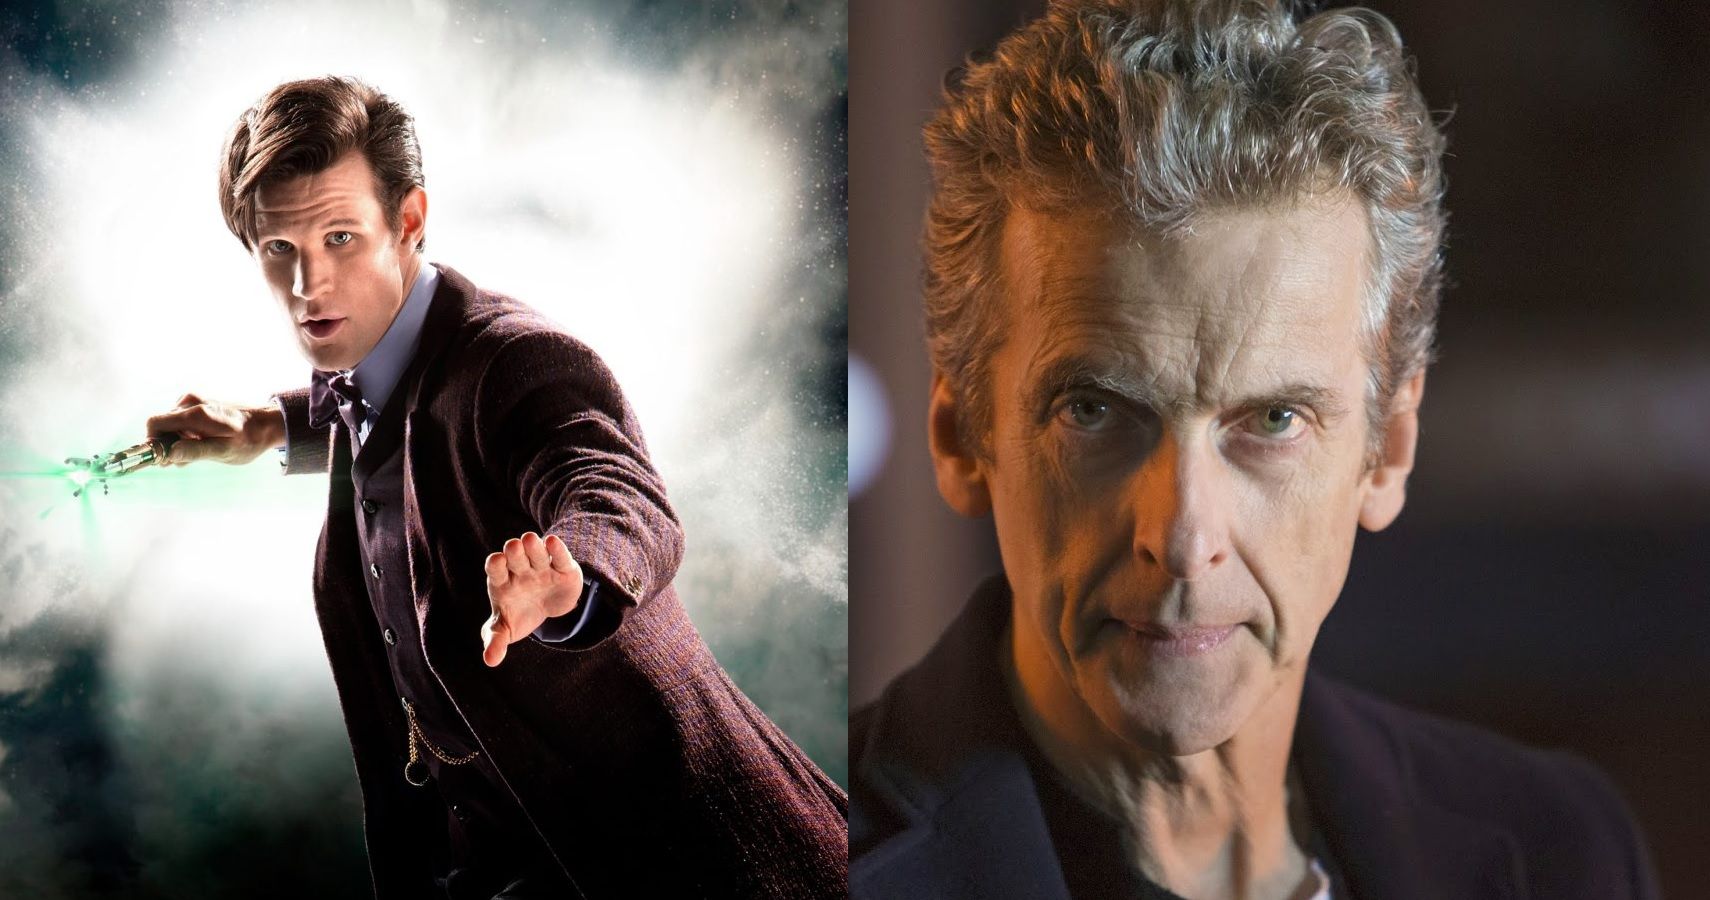 What will it take to be the 12th Doctor?